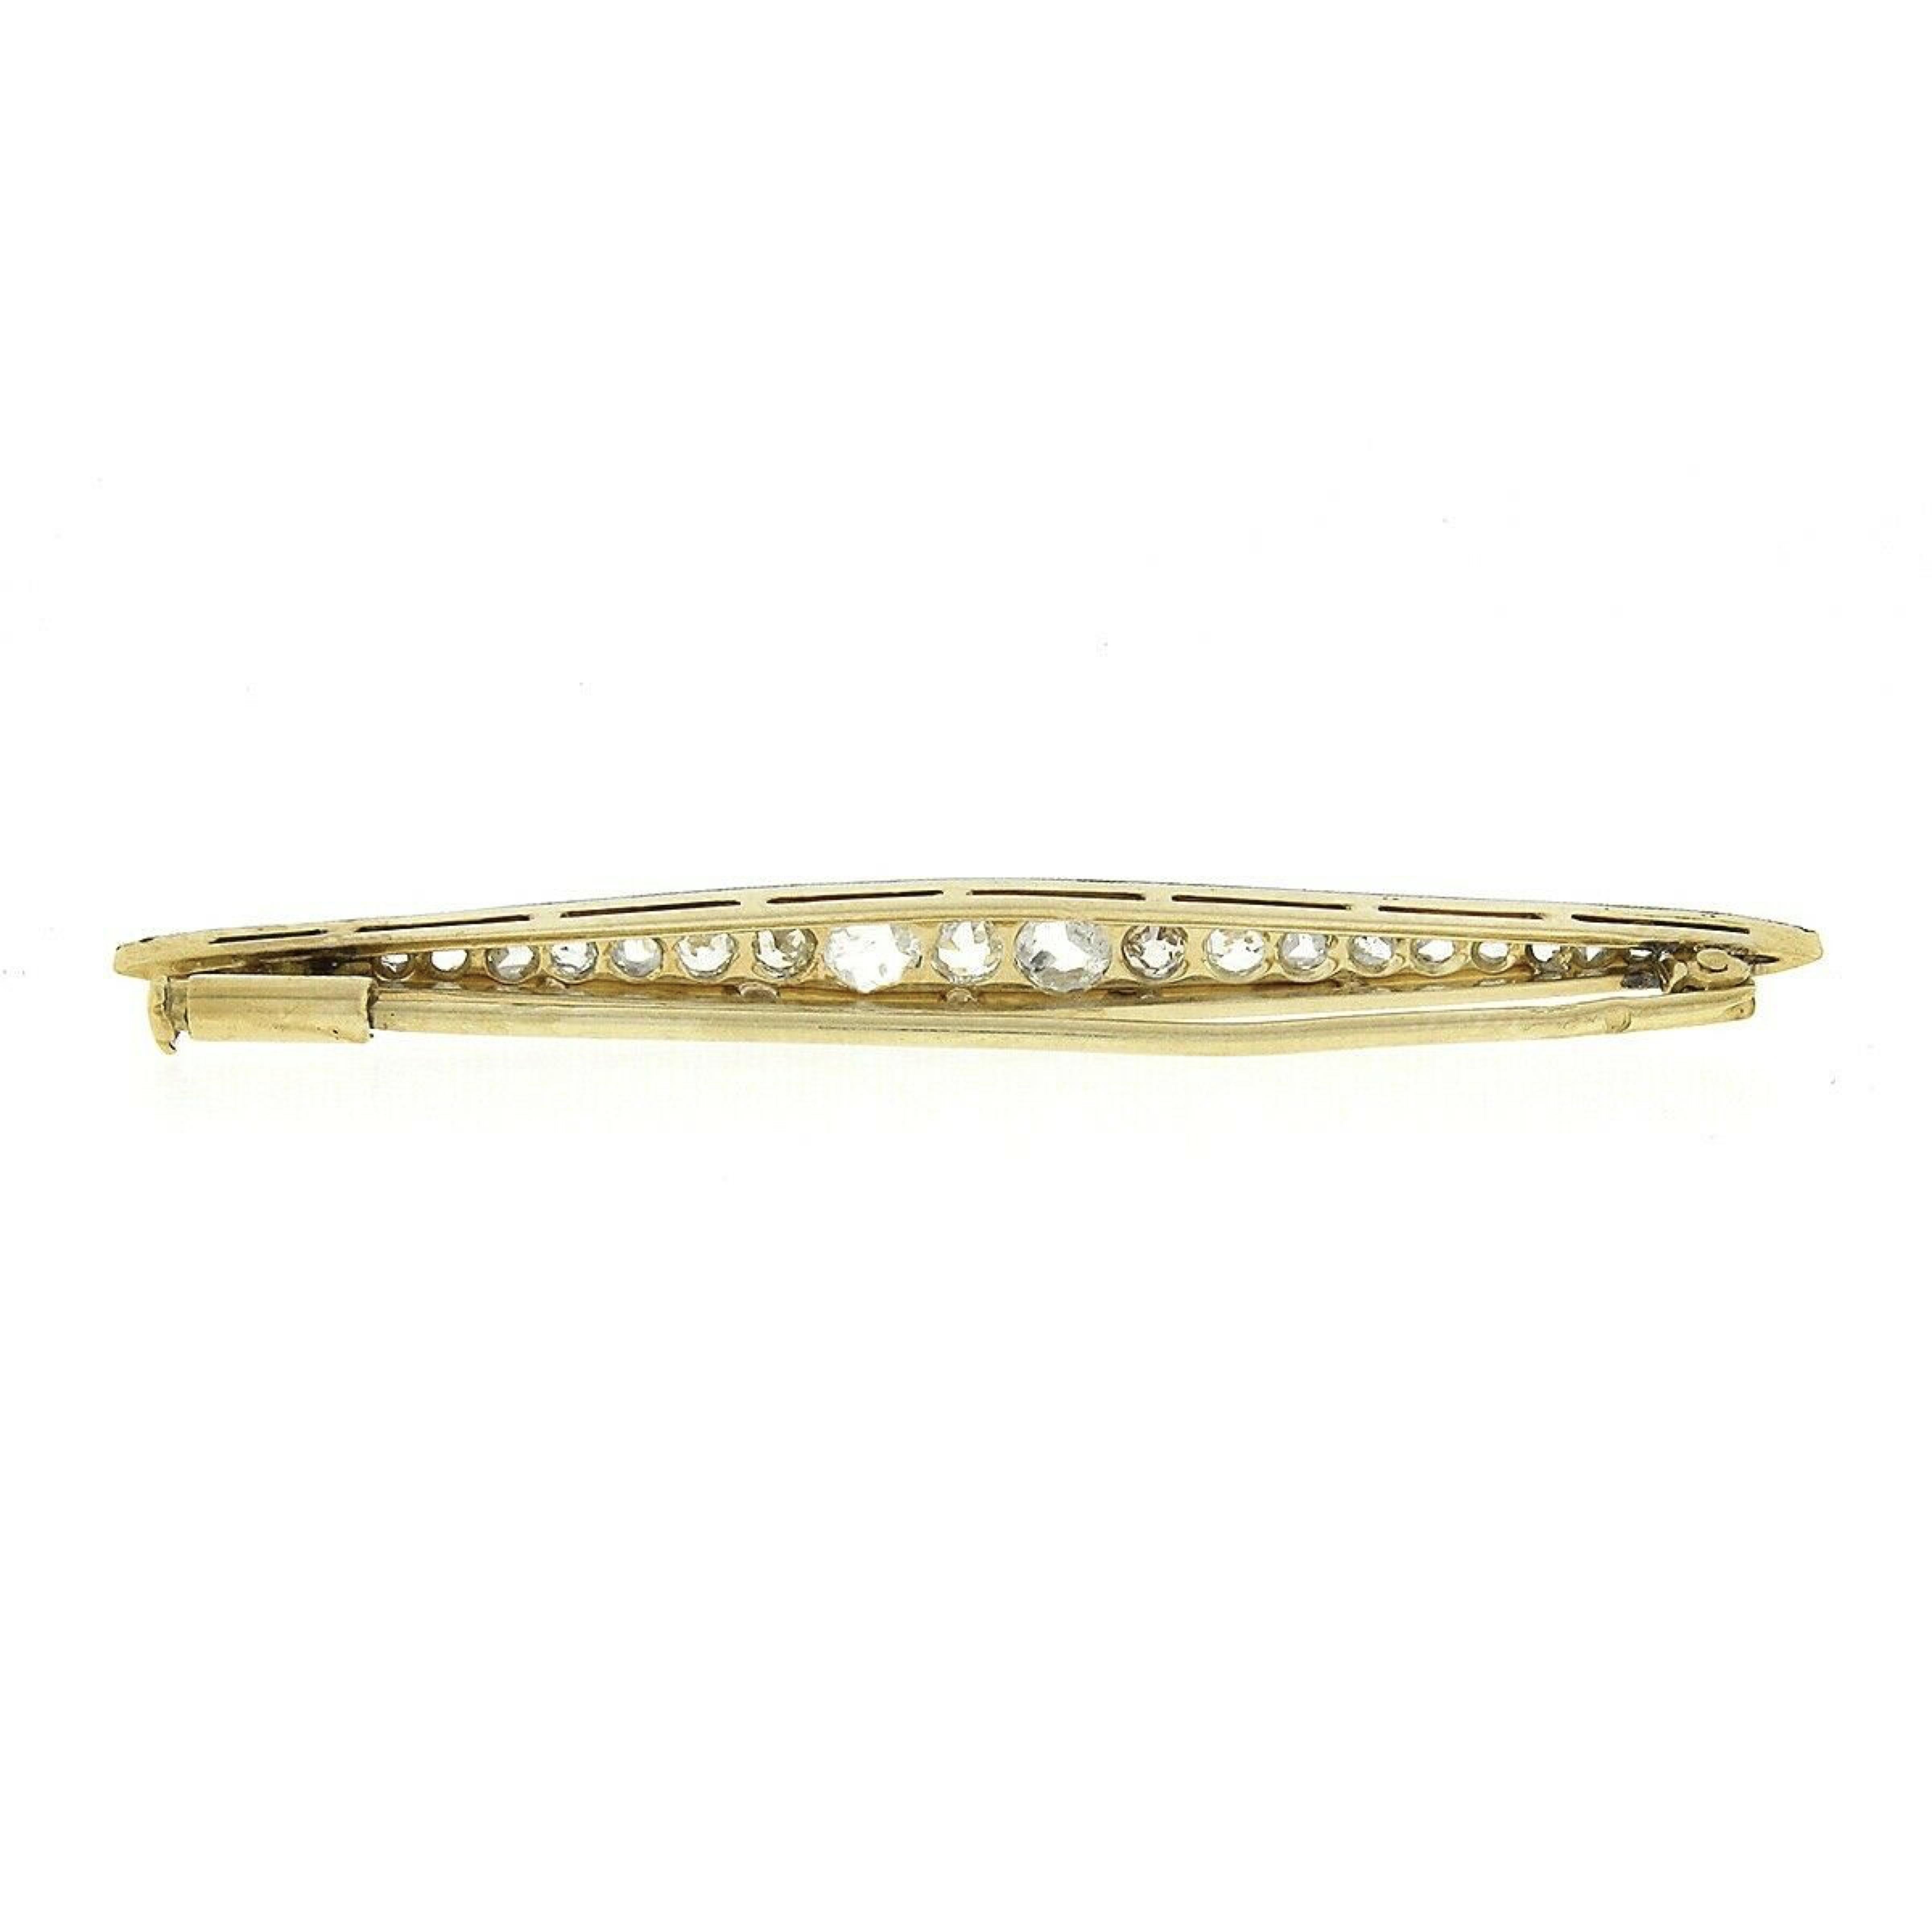 This elegant antique bar pin was crafted in France during the Edwardian era from solid 18k yellow gold with a platinum top and features approximately 0.85 carats of fine quality diamonds neatly pave set throughout. The gorgeous diamonds are old